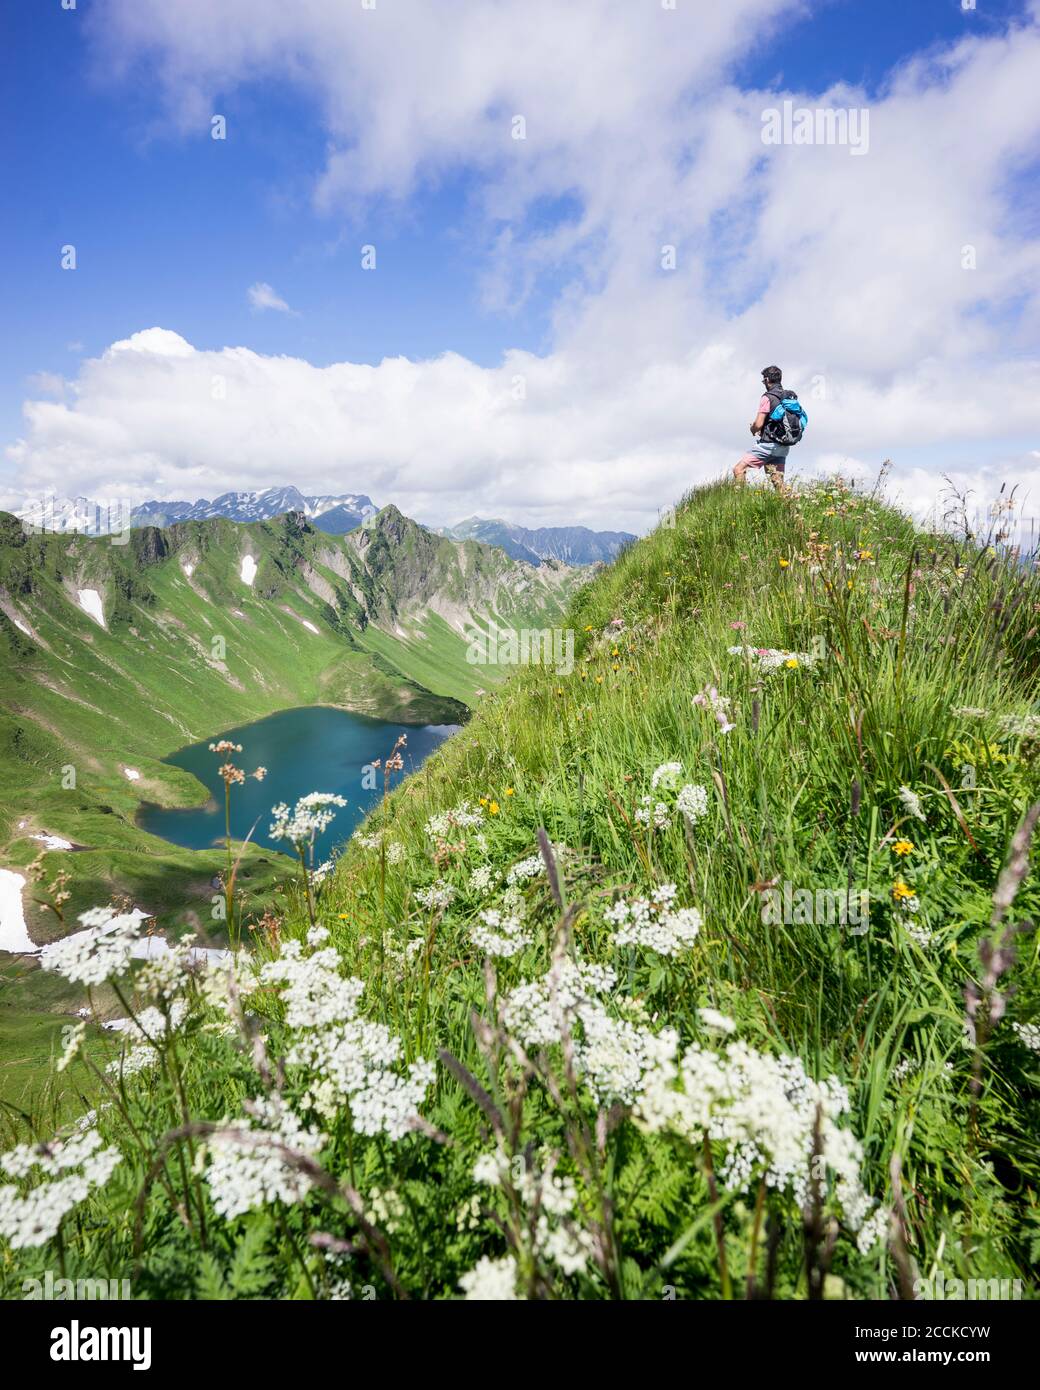 Hiker on viewpoint, Lake Schrecksee, Bavaria, Germany Stock Photo